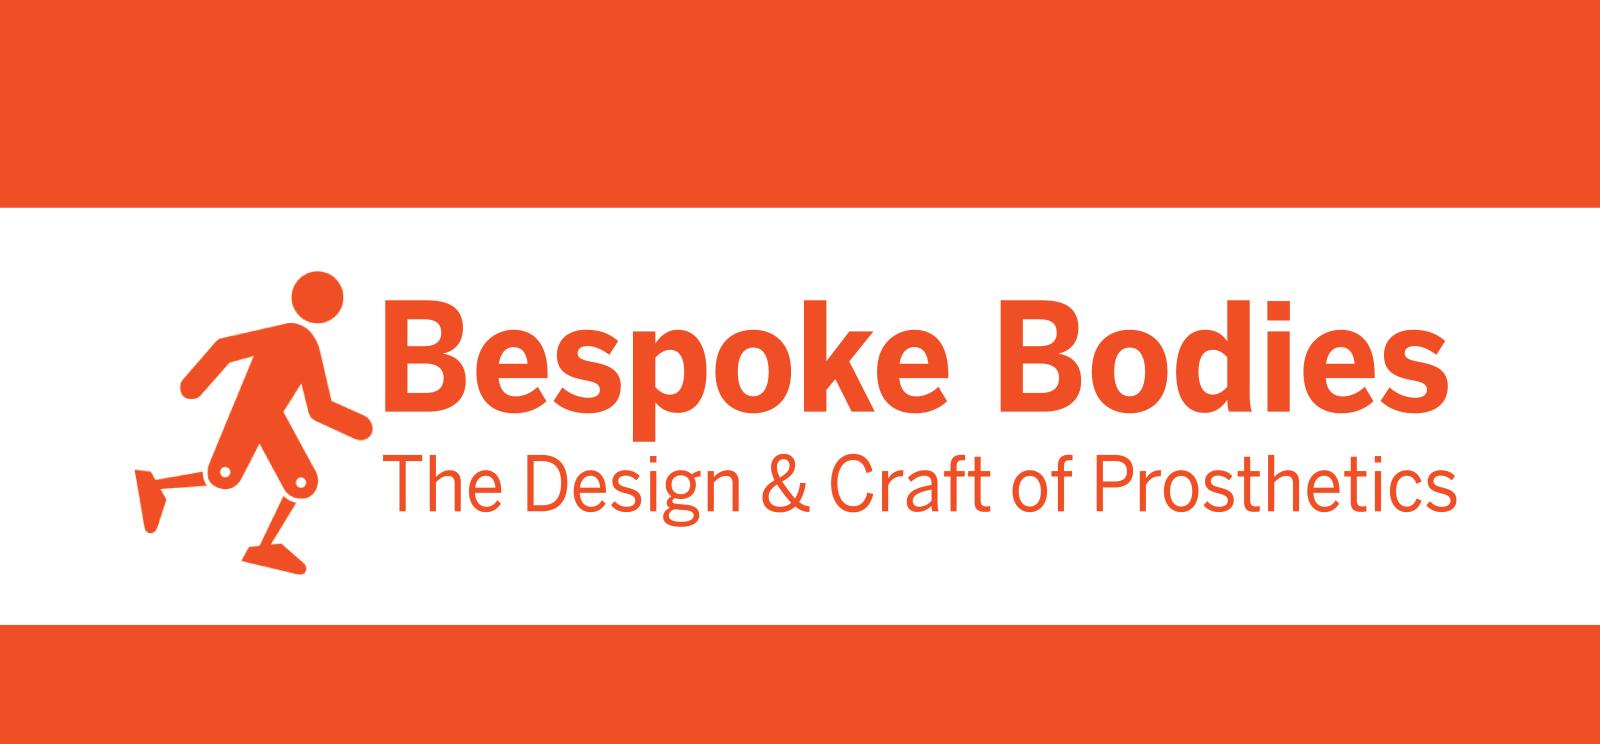 Image: simple orange graphic of a running human with prosthetic legs. Text in orange: Bespoke Bodies / The Design & Craft of Prosthetics